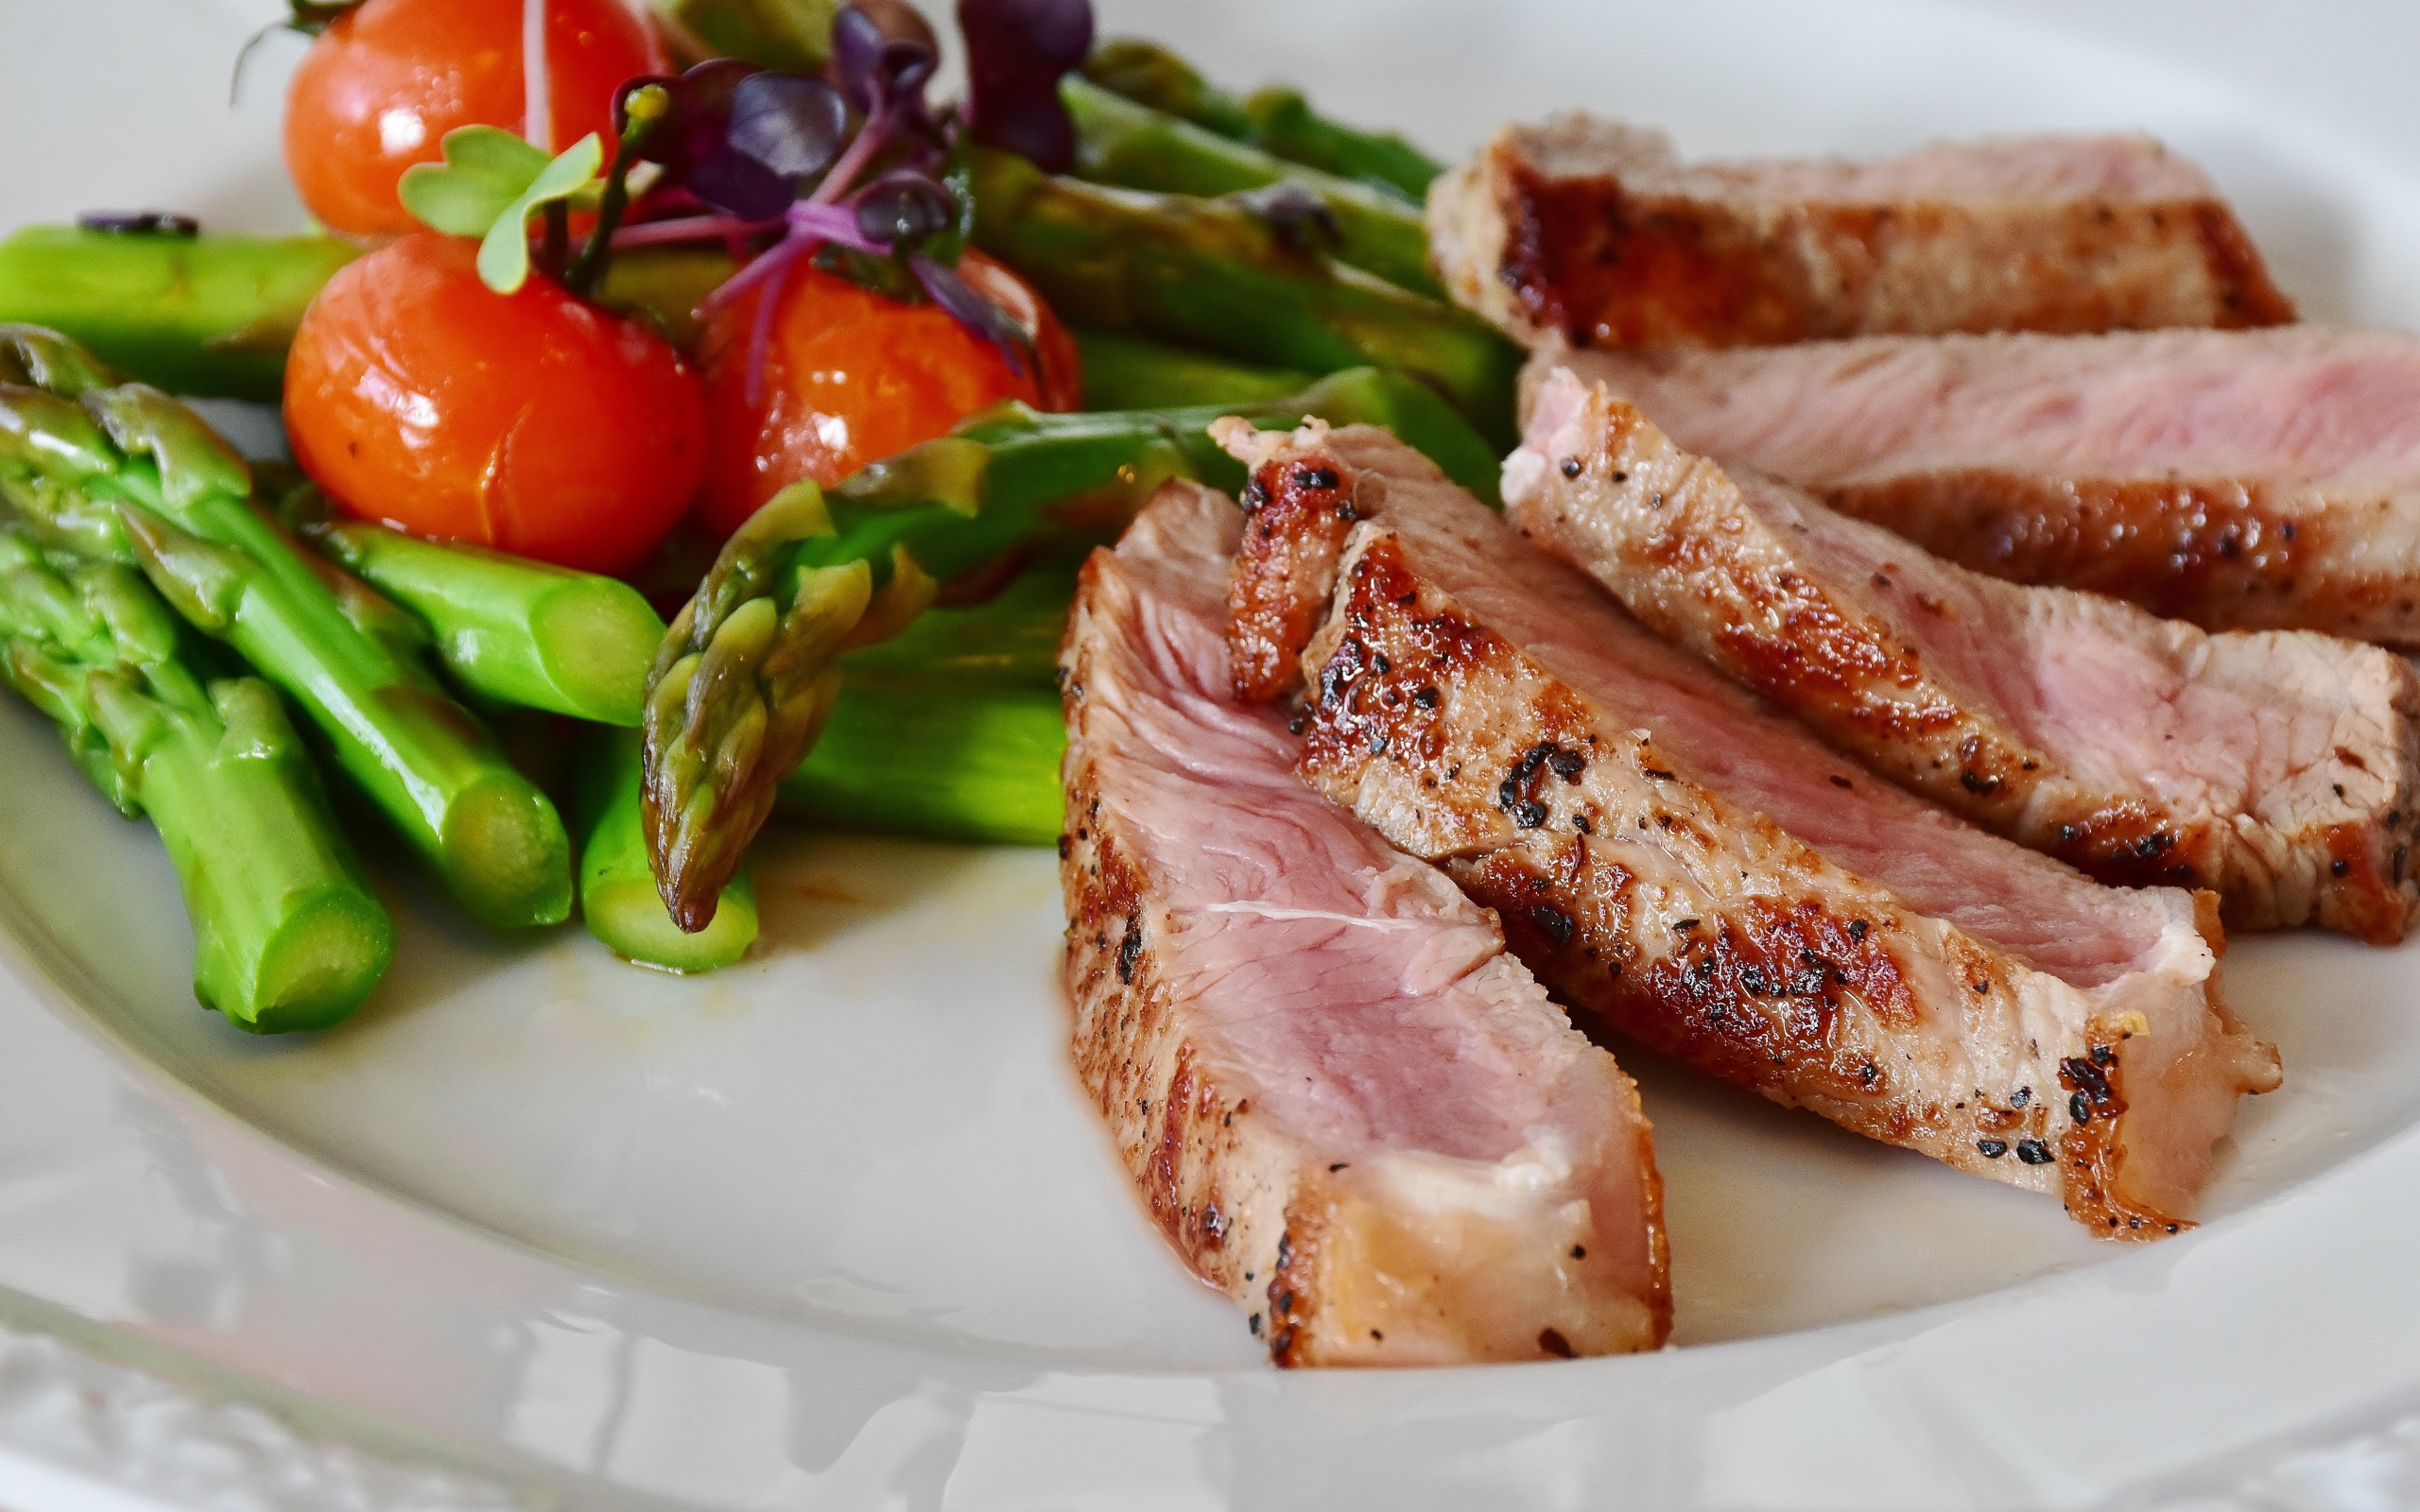 Chunks of meat on a plate with asparagus and tomatoes